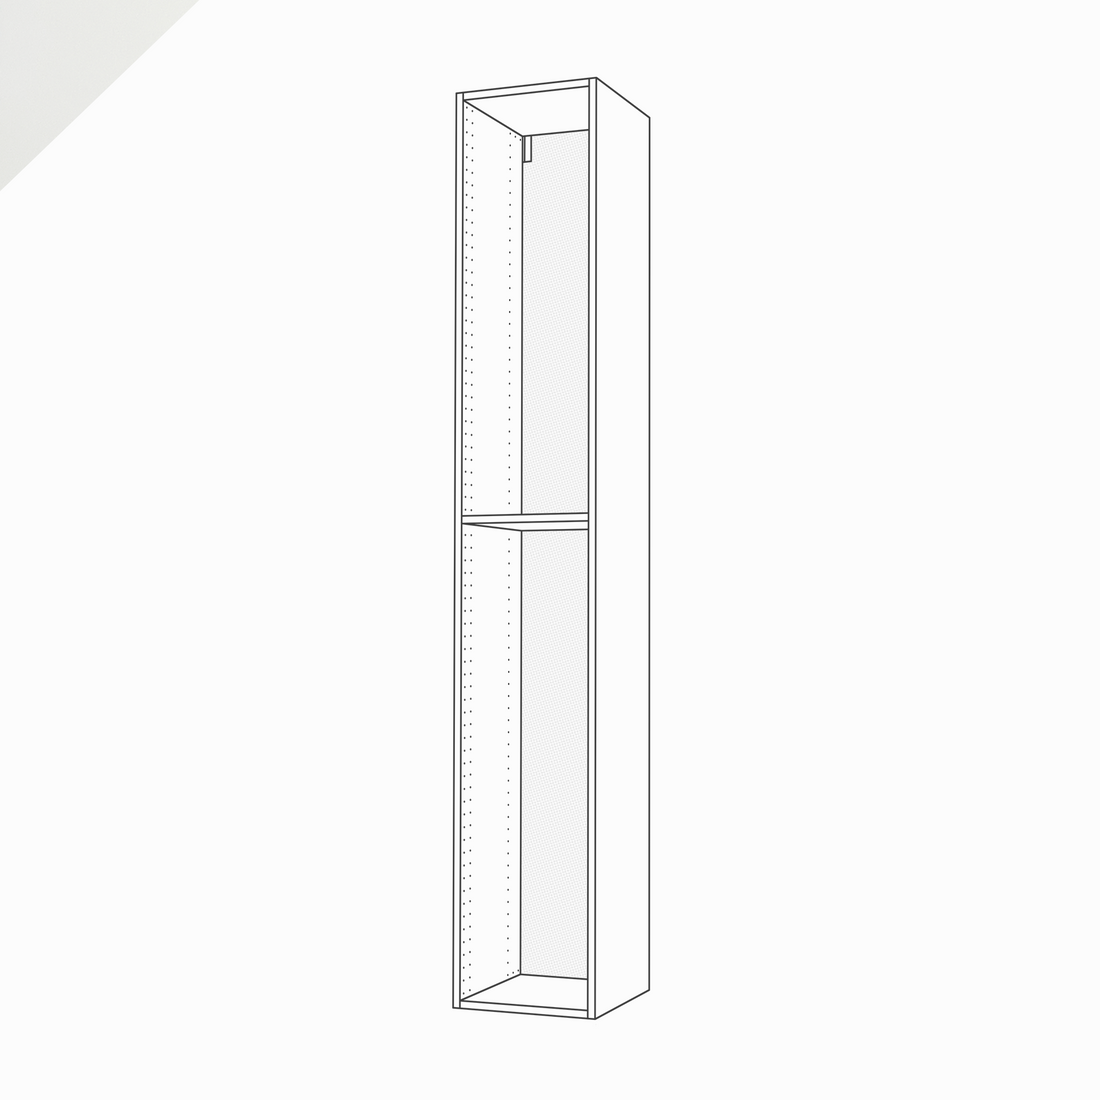 Shallow-Depth, Tall Cabinet, 90" Height